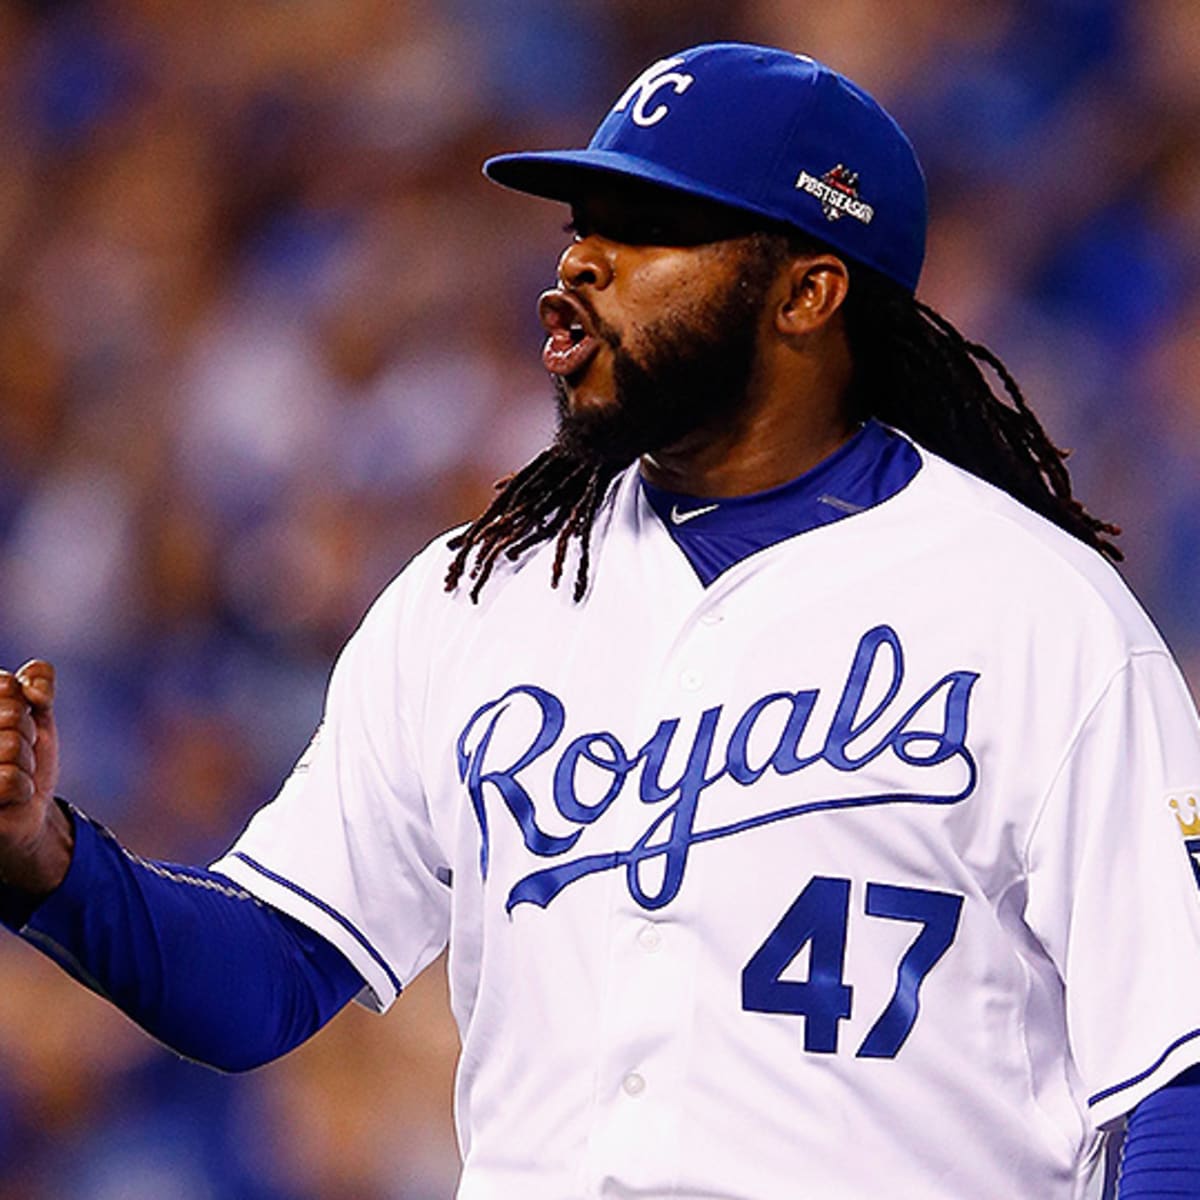 Royals excited to acquire Cueto from Reds